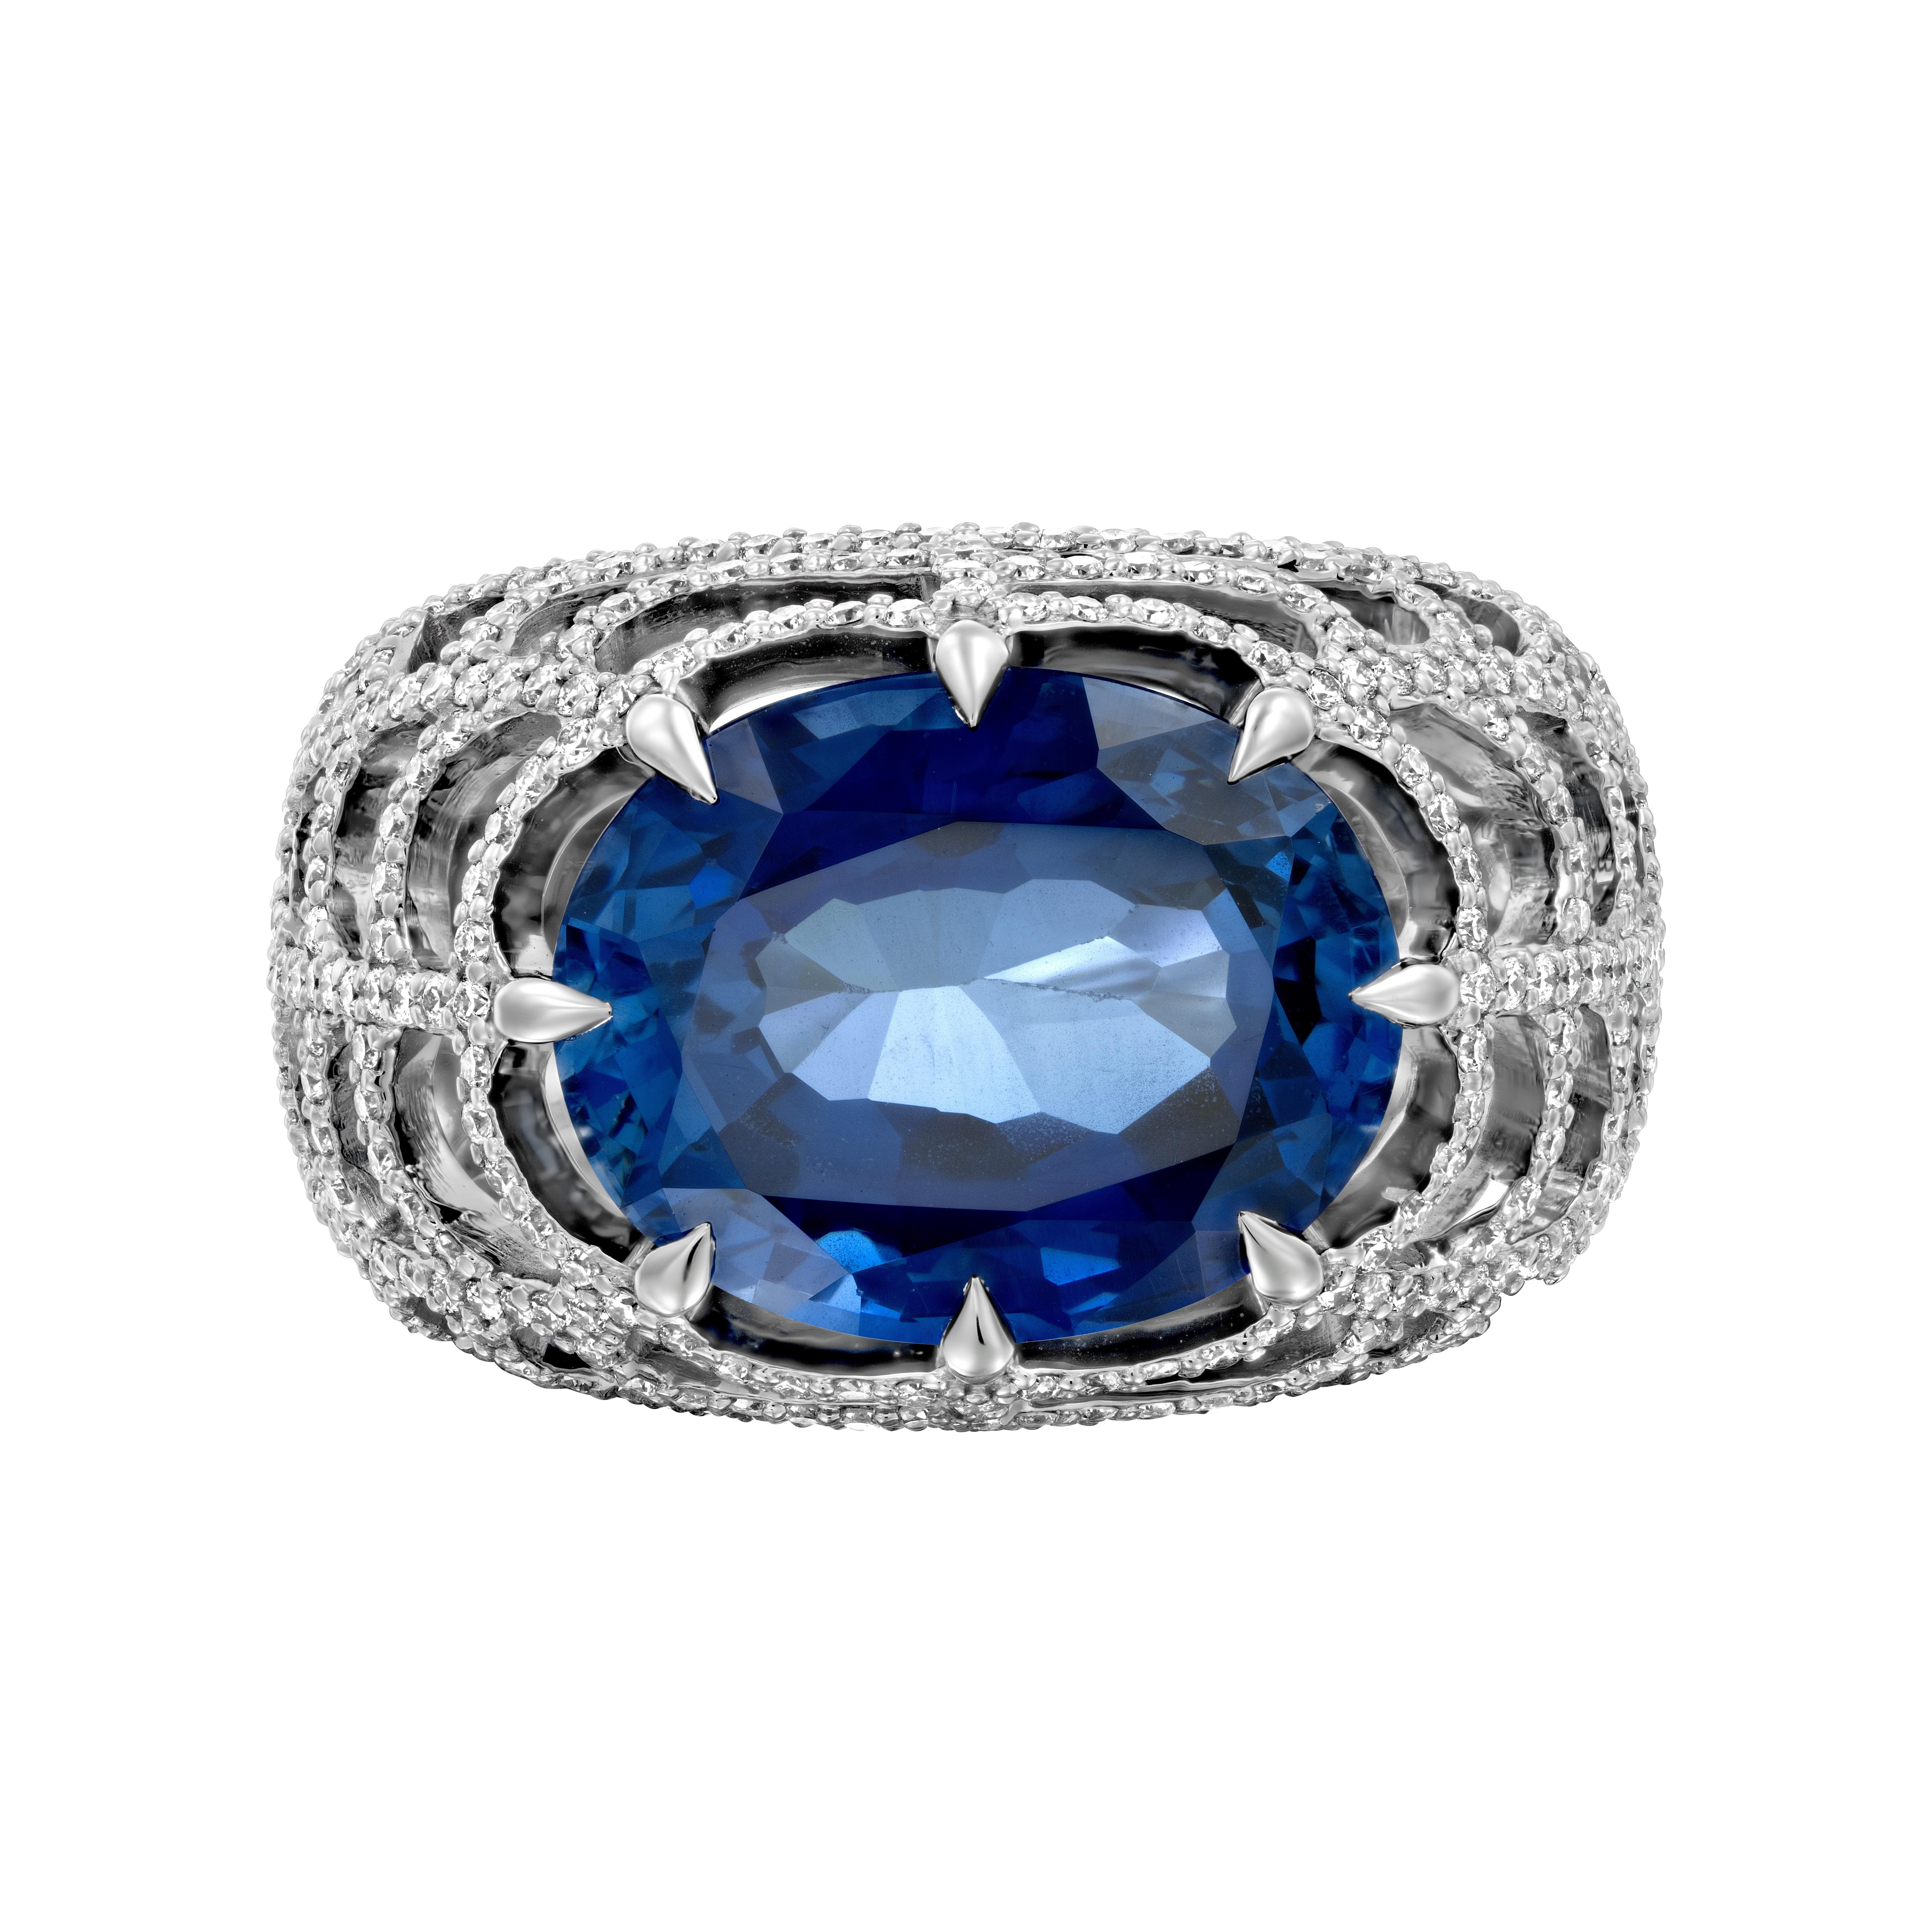 Elevate your style with the breathtaking Geraldo 7-carat Sapphire Diamond Ring, an authentic statement piece that exudes luxury and sophistication. This exceptional ring combines the allure of sparkling round diamonds with the captivating beauty of